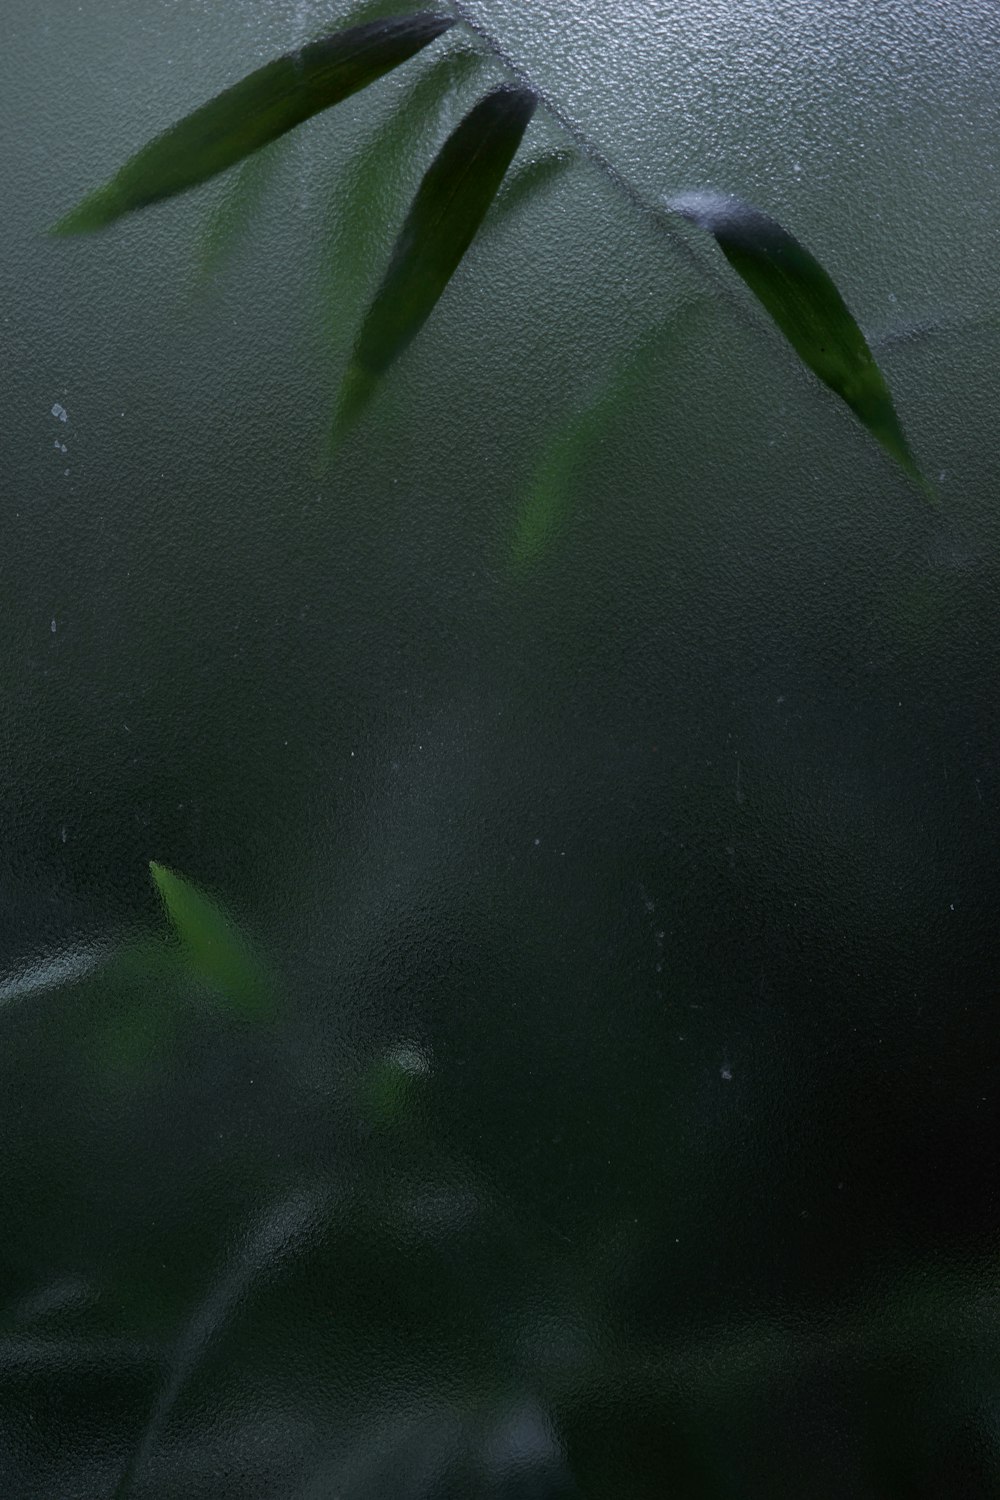 a blurry photo of a plant with leaves